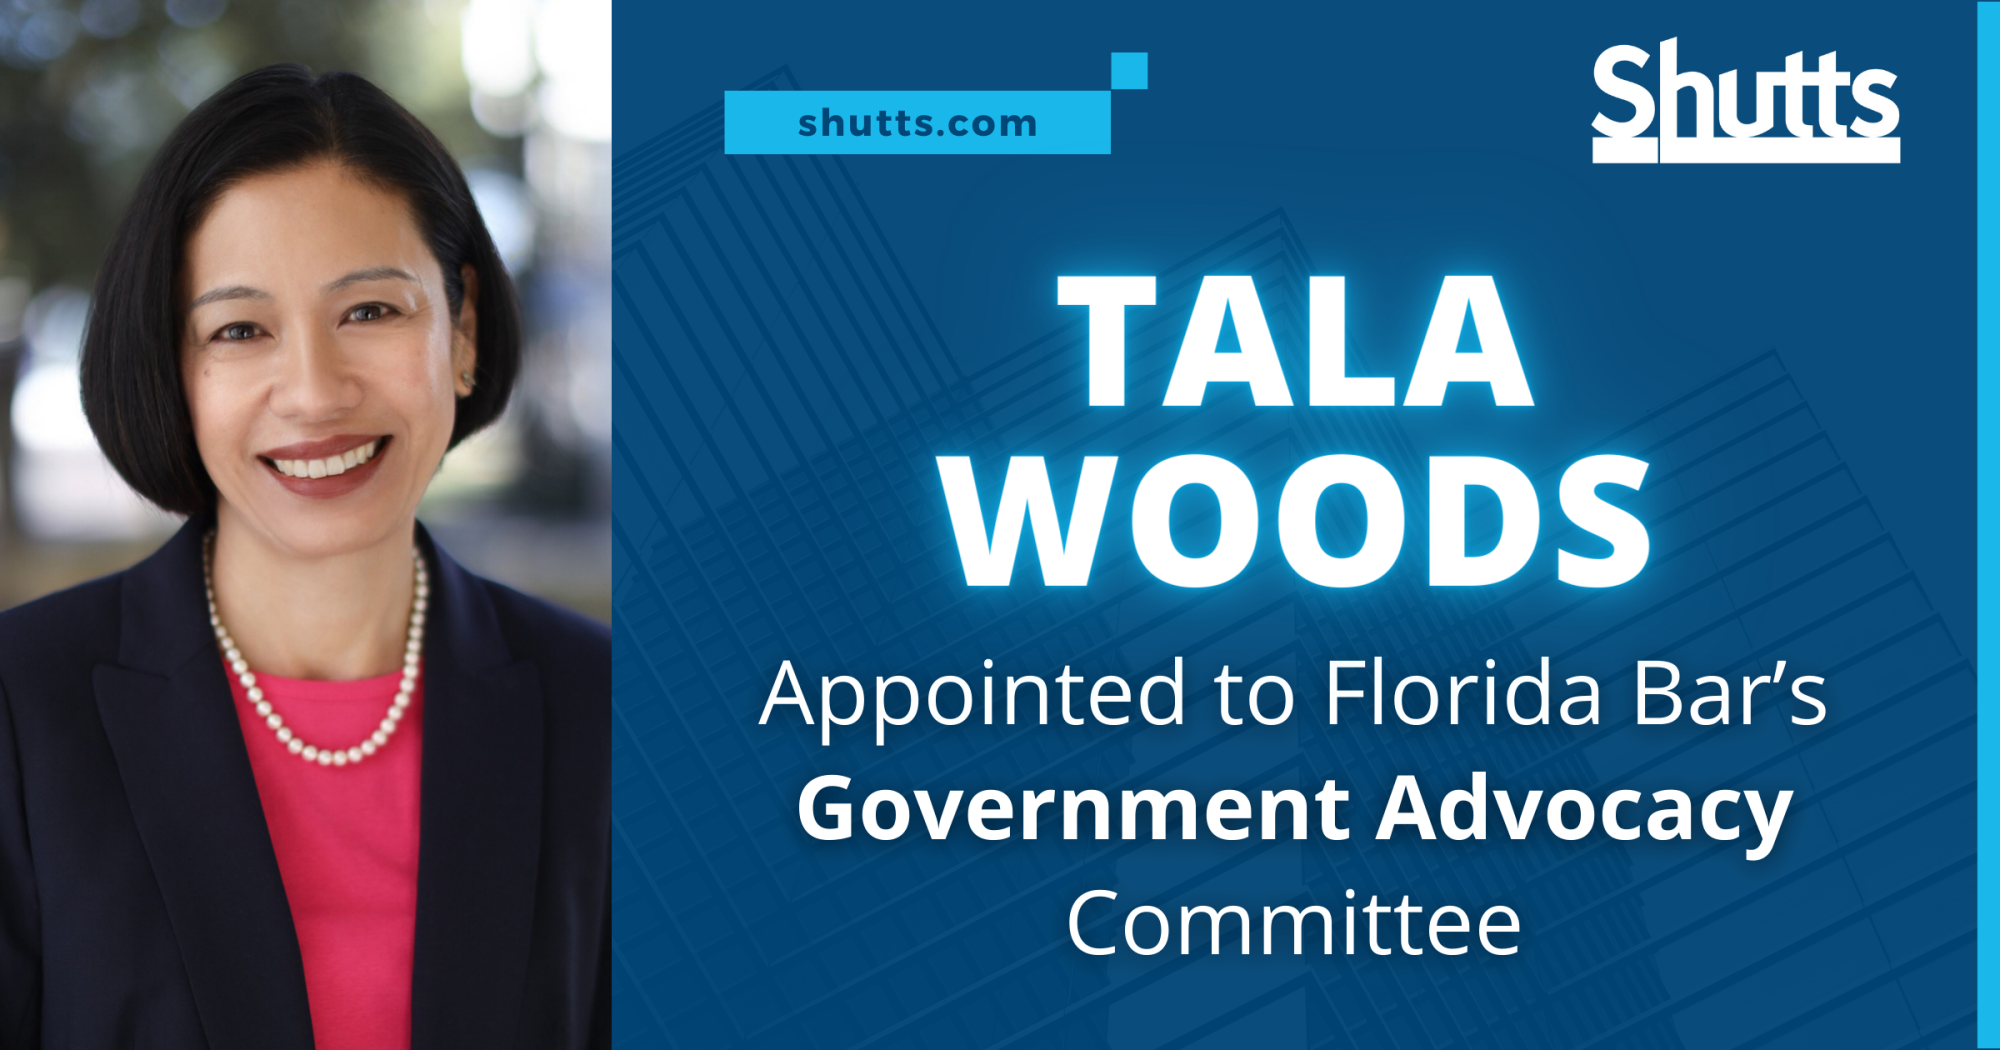 Tala Woods Appointed to Florida Bar’s Government Advocacy Committee